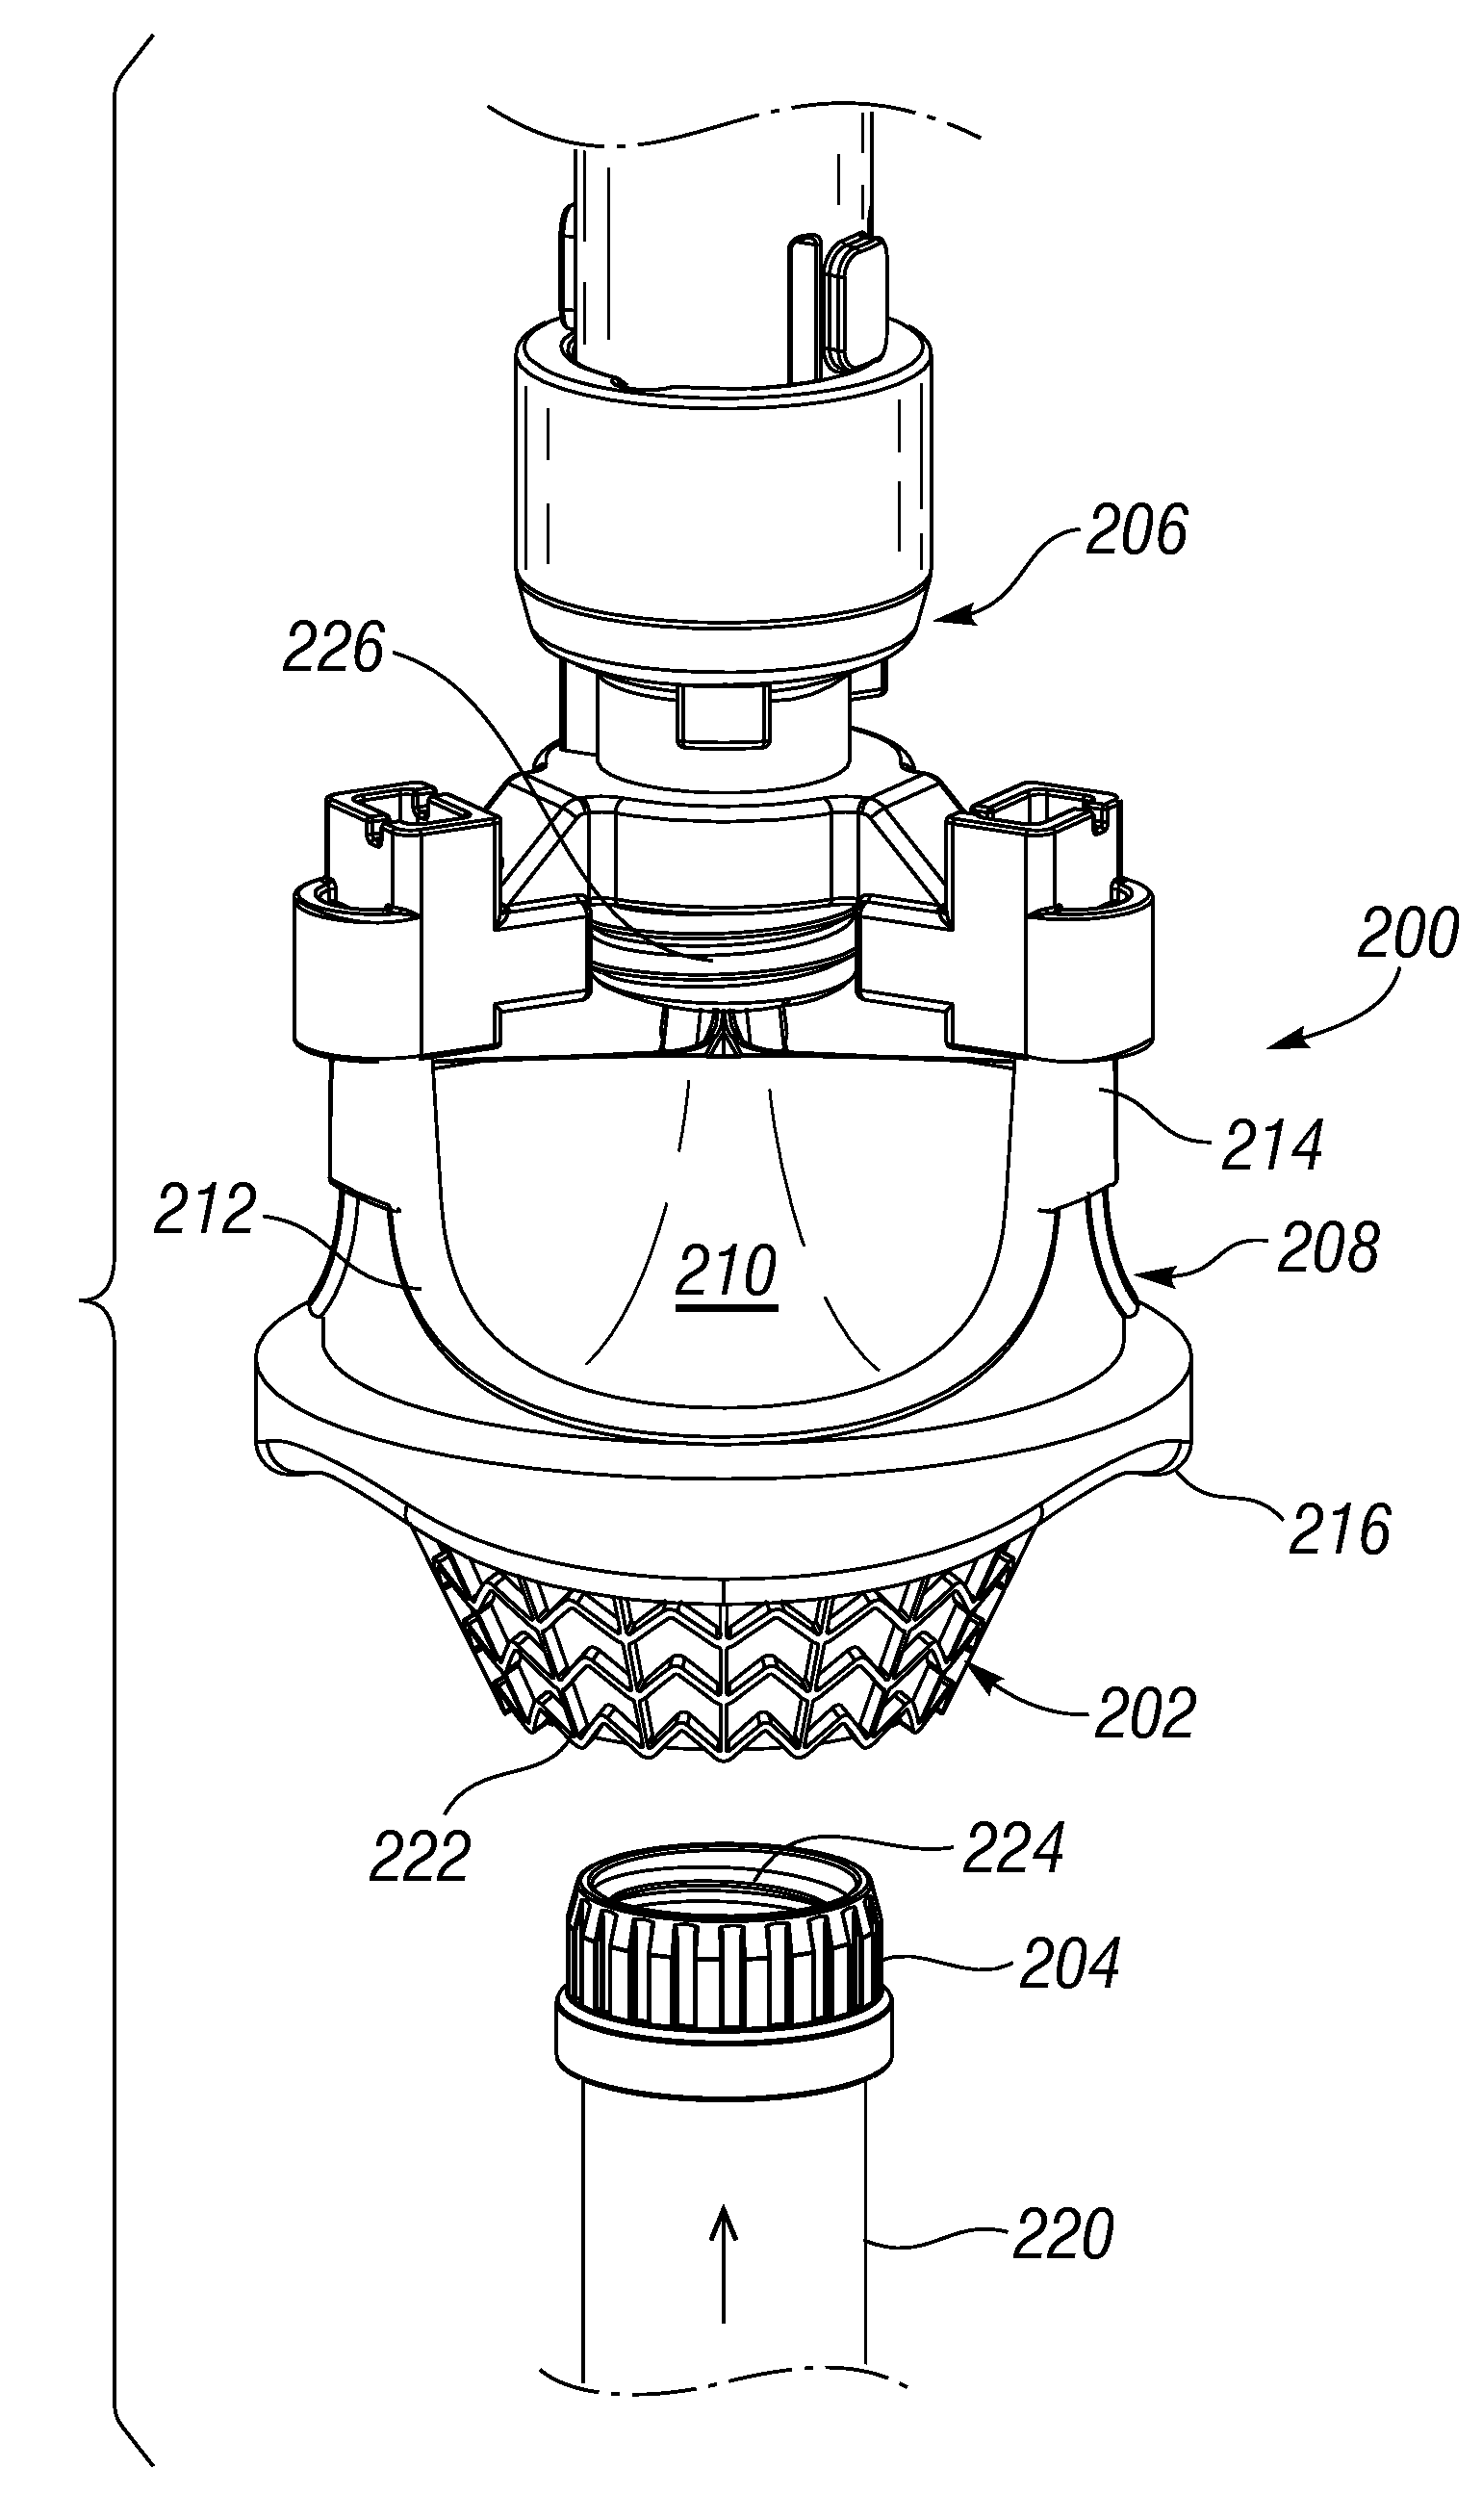 Unitary quick connect prosthetic heart valve and deployment system and methods